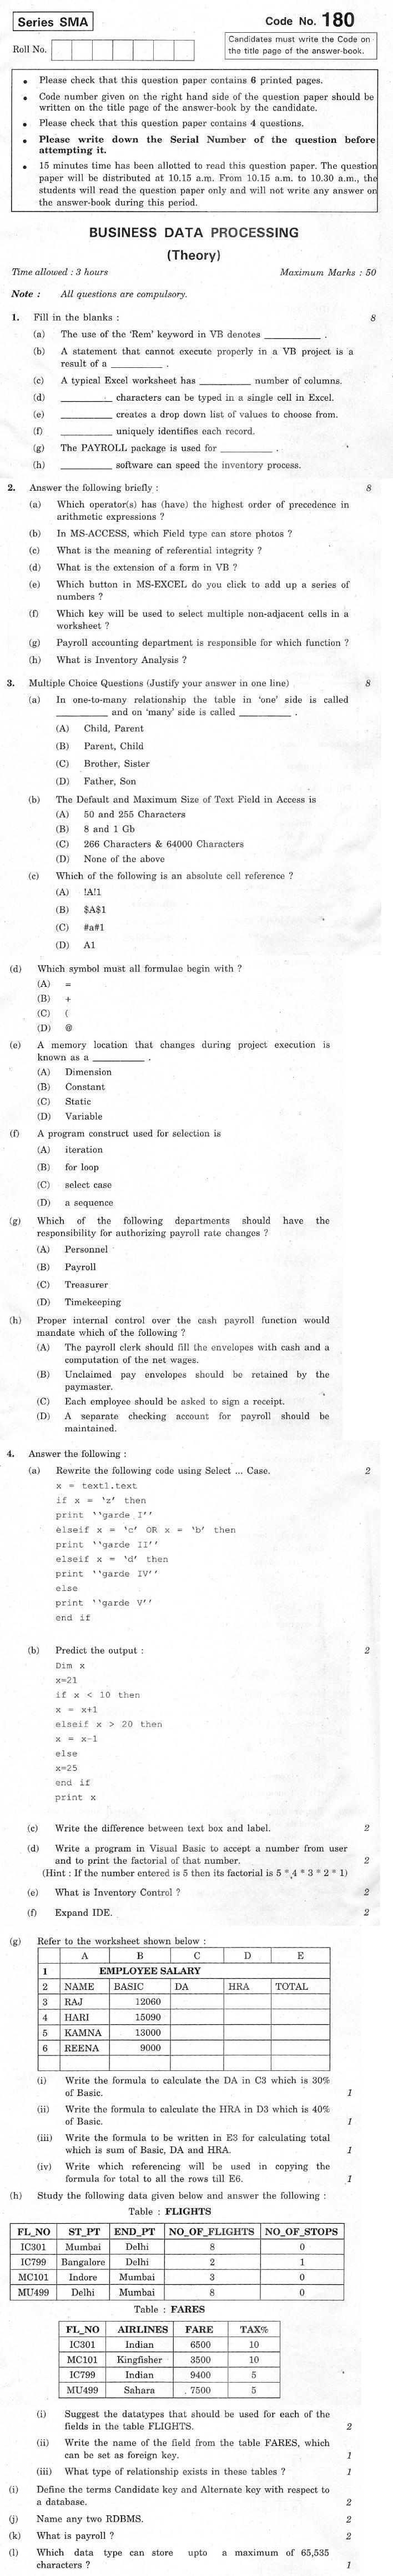 CBSE Class XII Previous Year Question Paper 2012 Business Data Processing